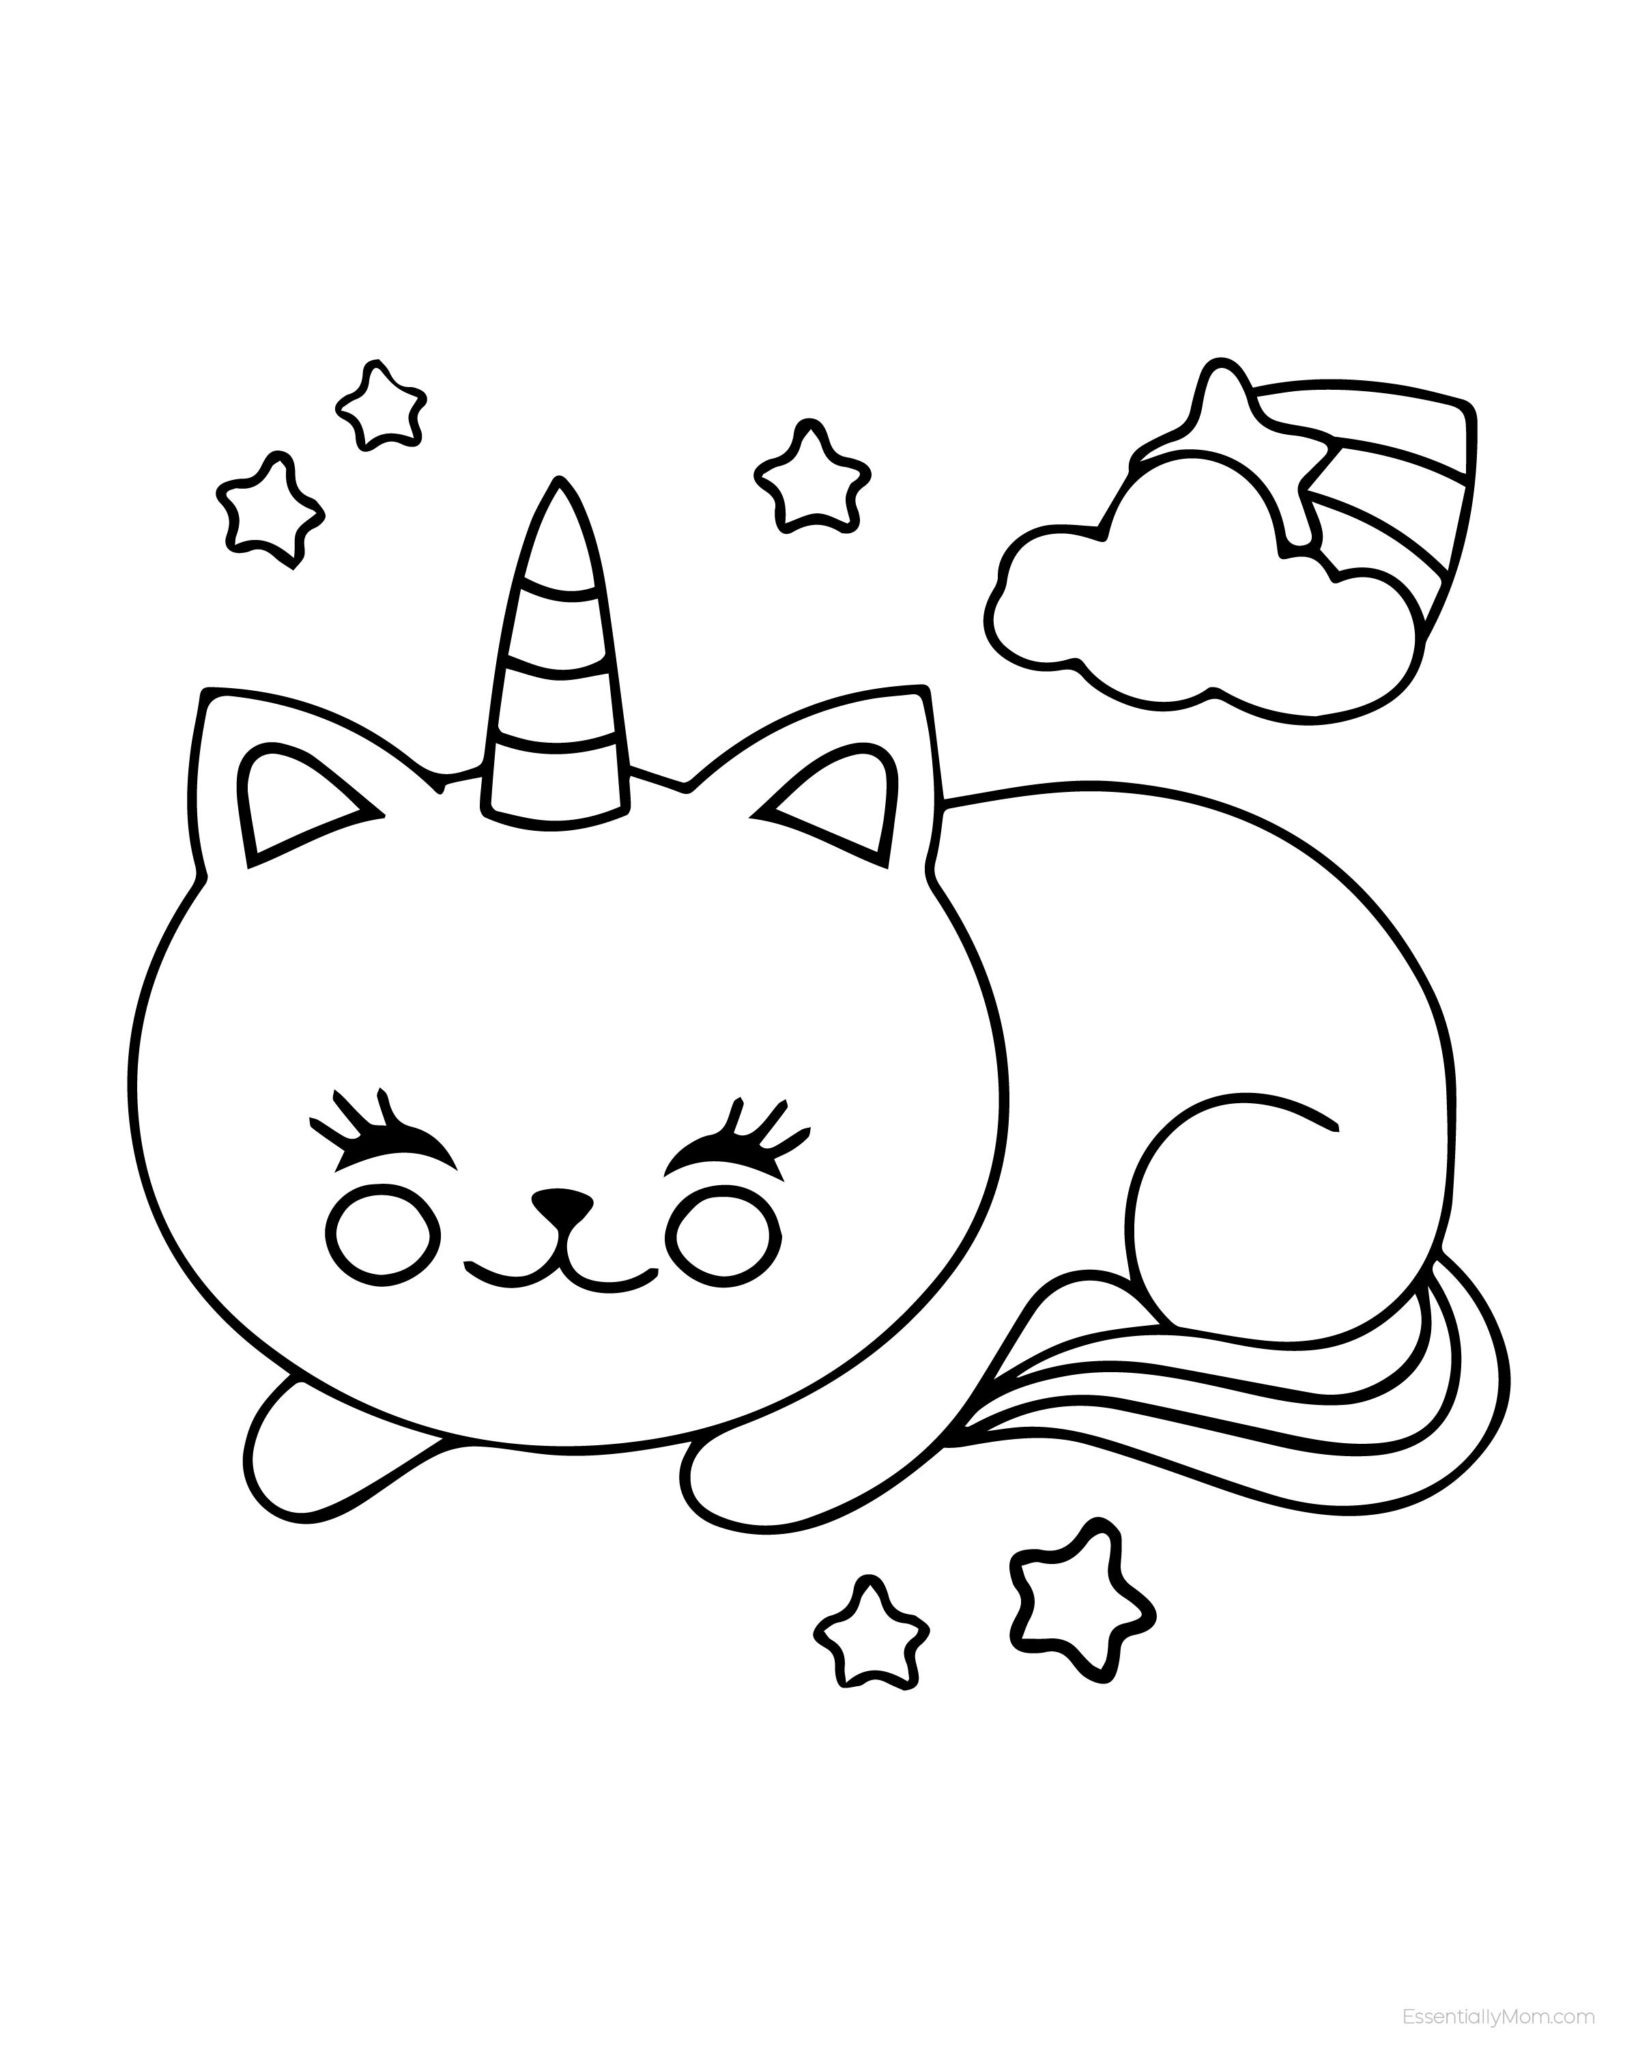 FREE Unicorn Coloring Pages Printable for Kids | Unicorn coloring book